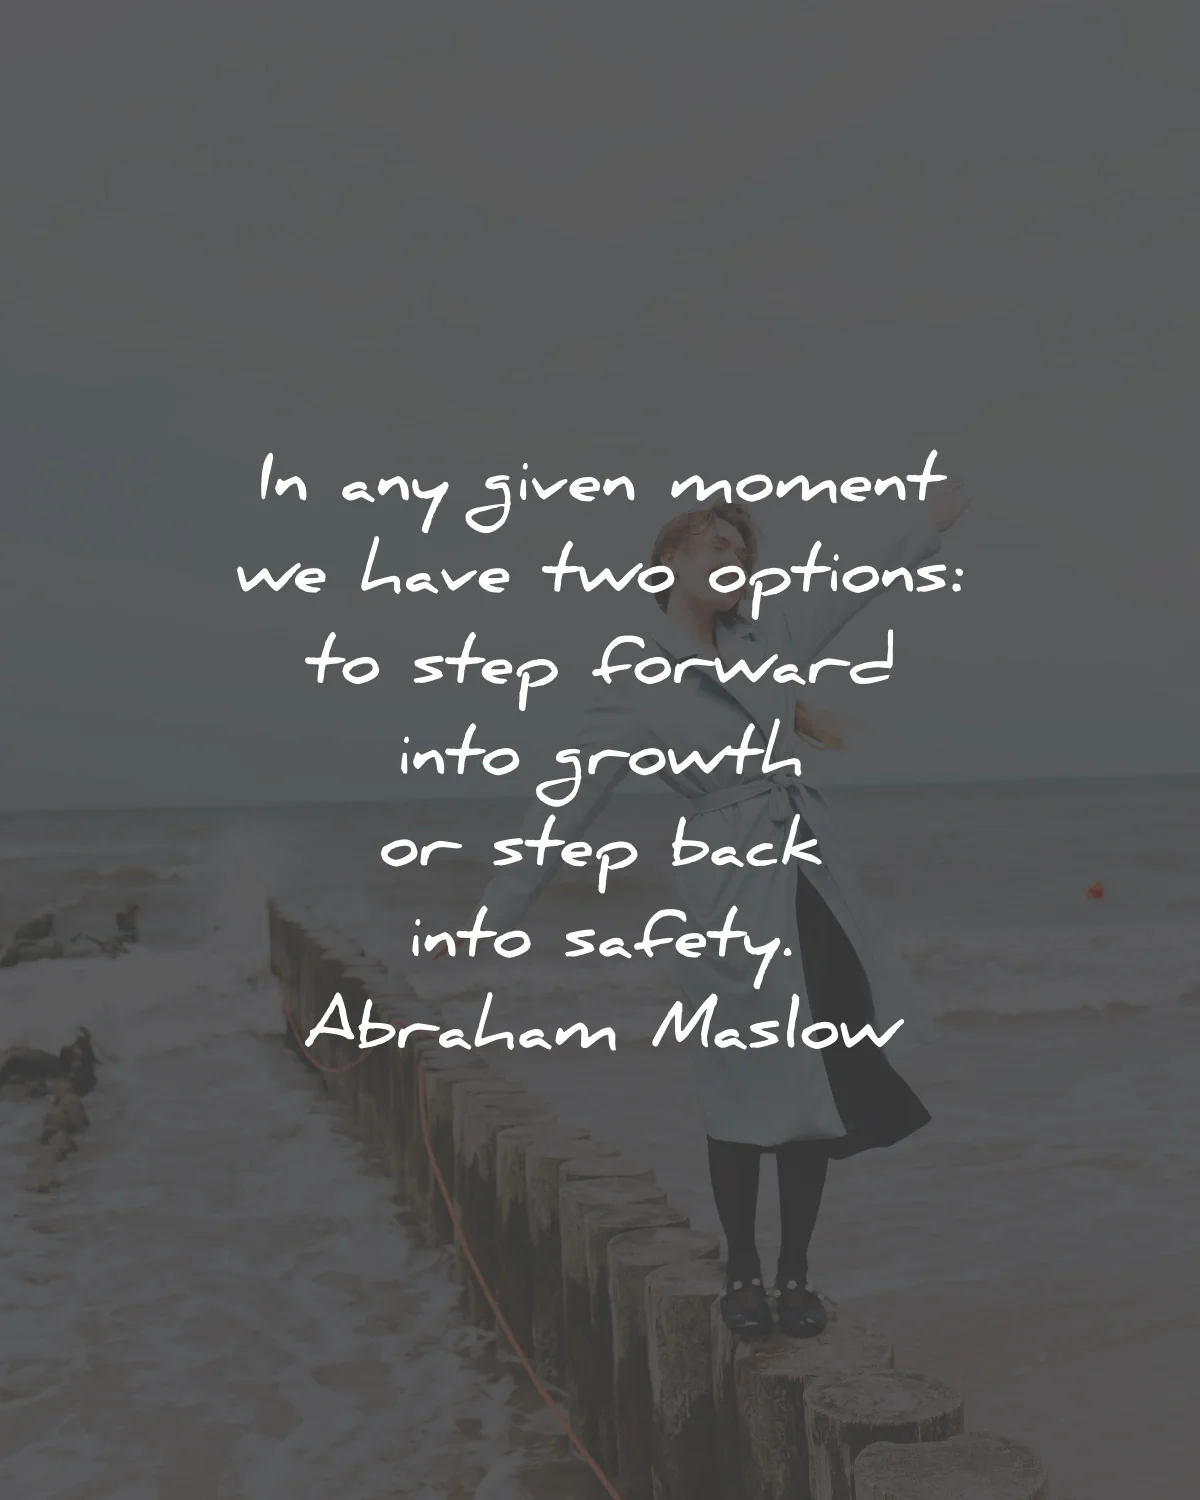 quotes about change growth given moment two options step forward abraham maslow wisdom